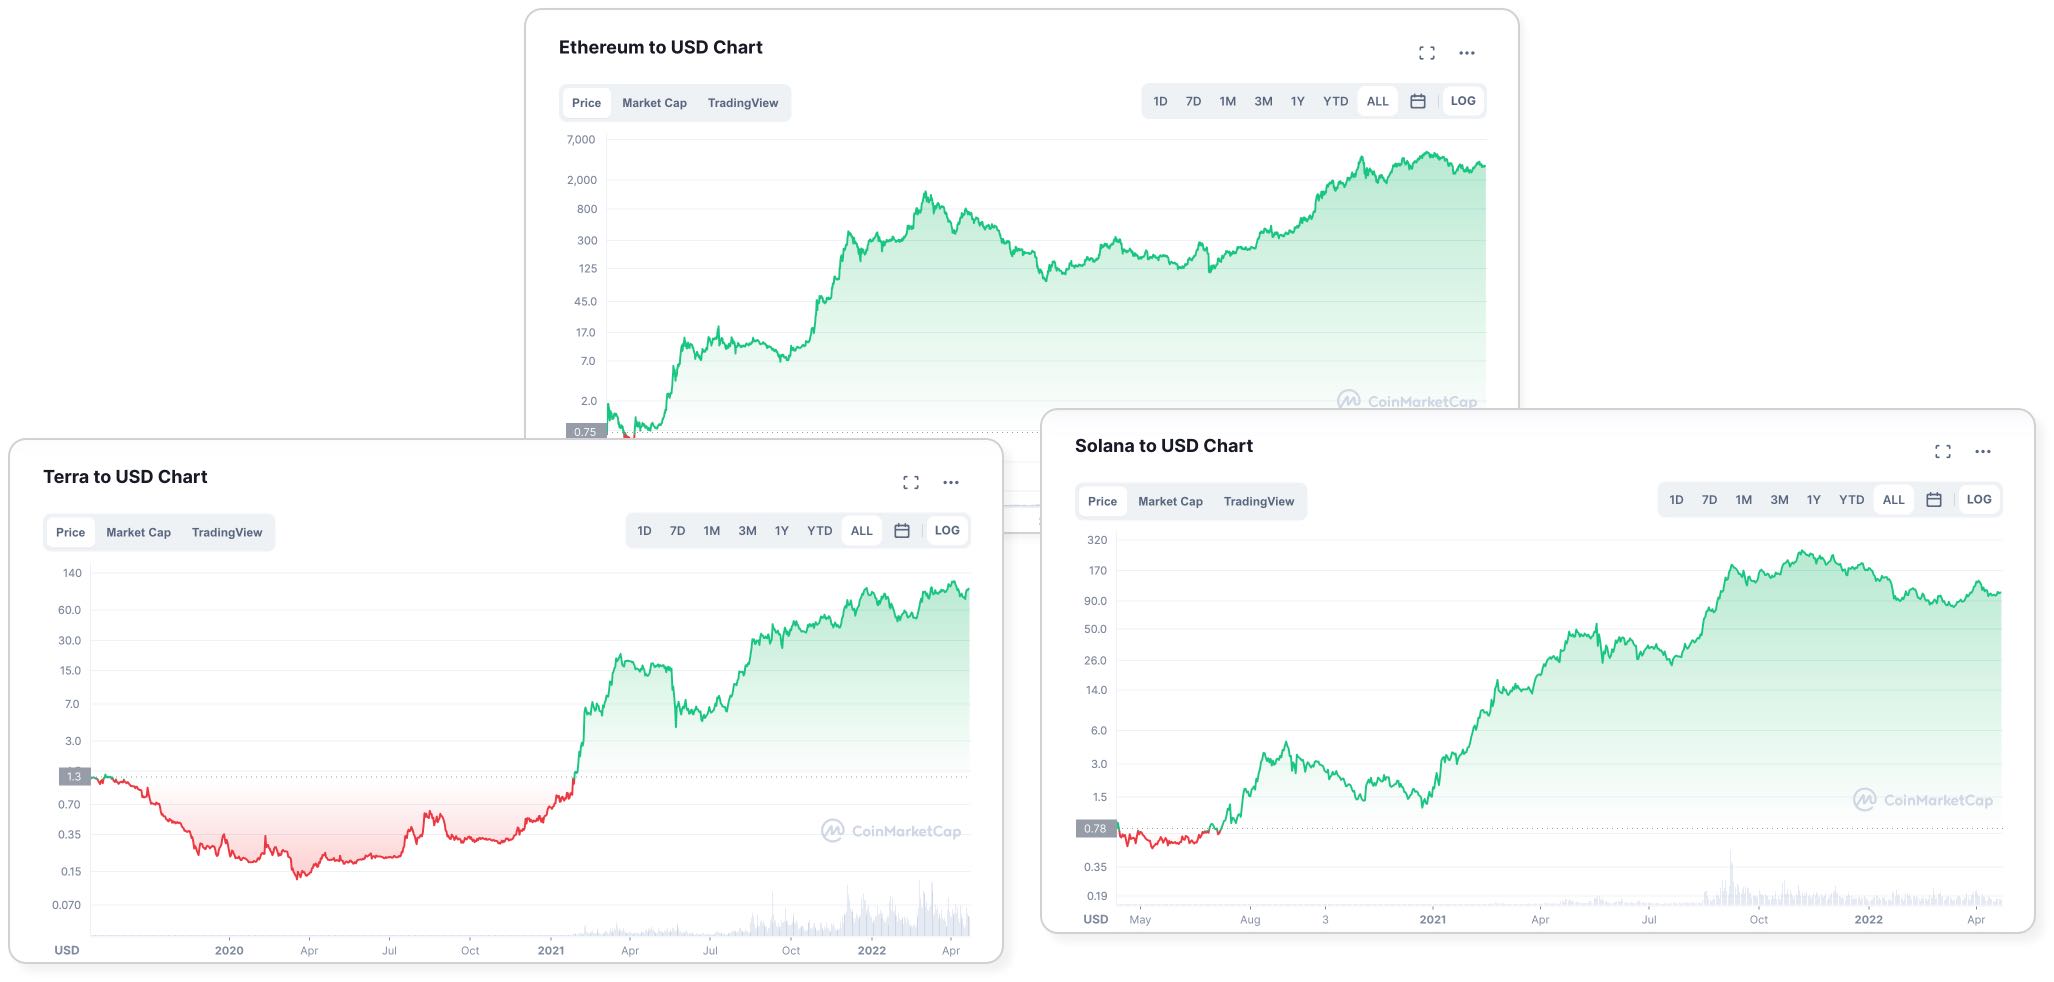 Price charts of ETH, LUNA, and SOL